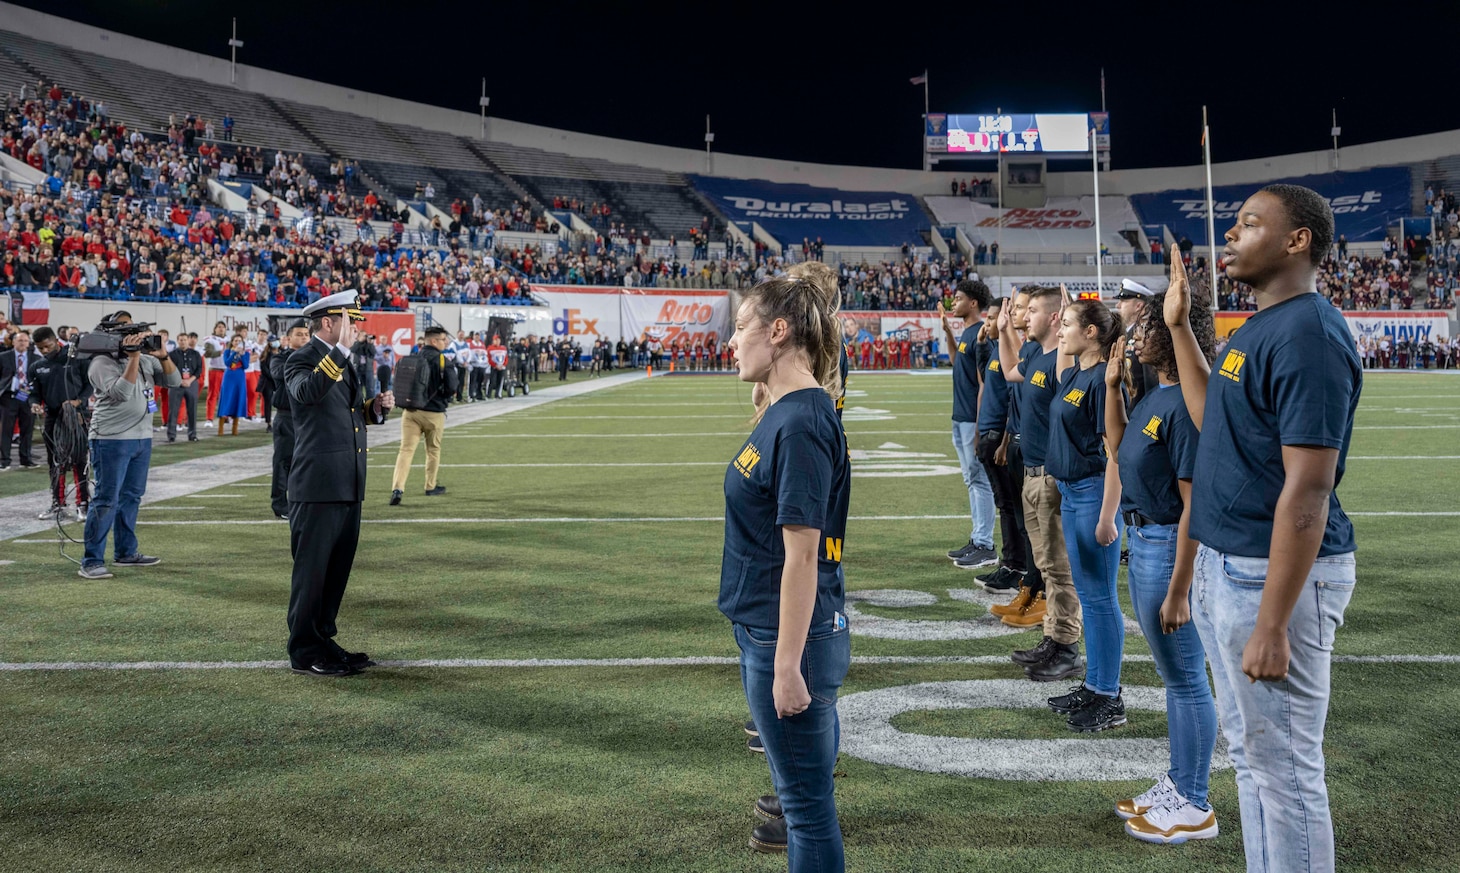 Cmdr. John Culpepper leads future Sailors in the oath of enlistment before the 2021 Liberty Bowl.